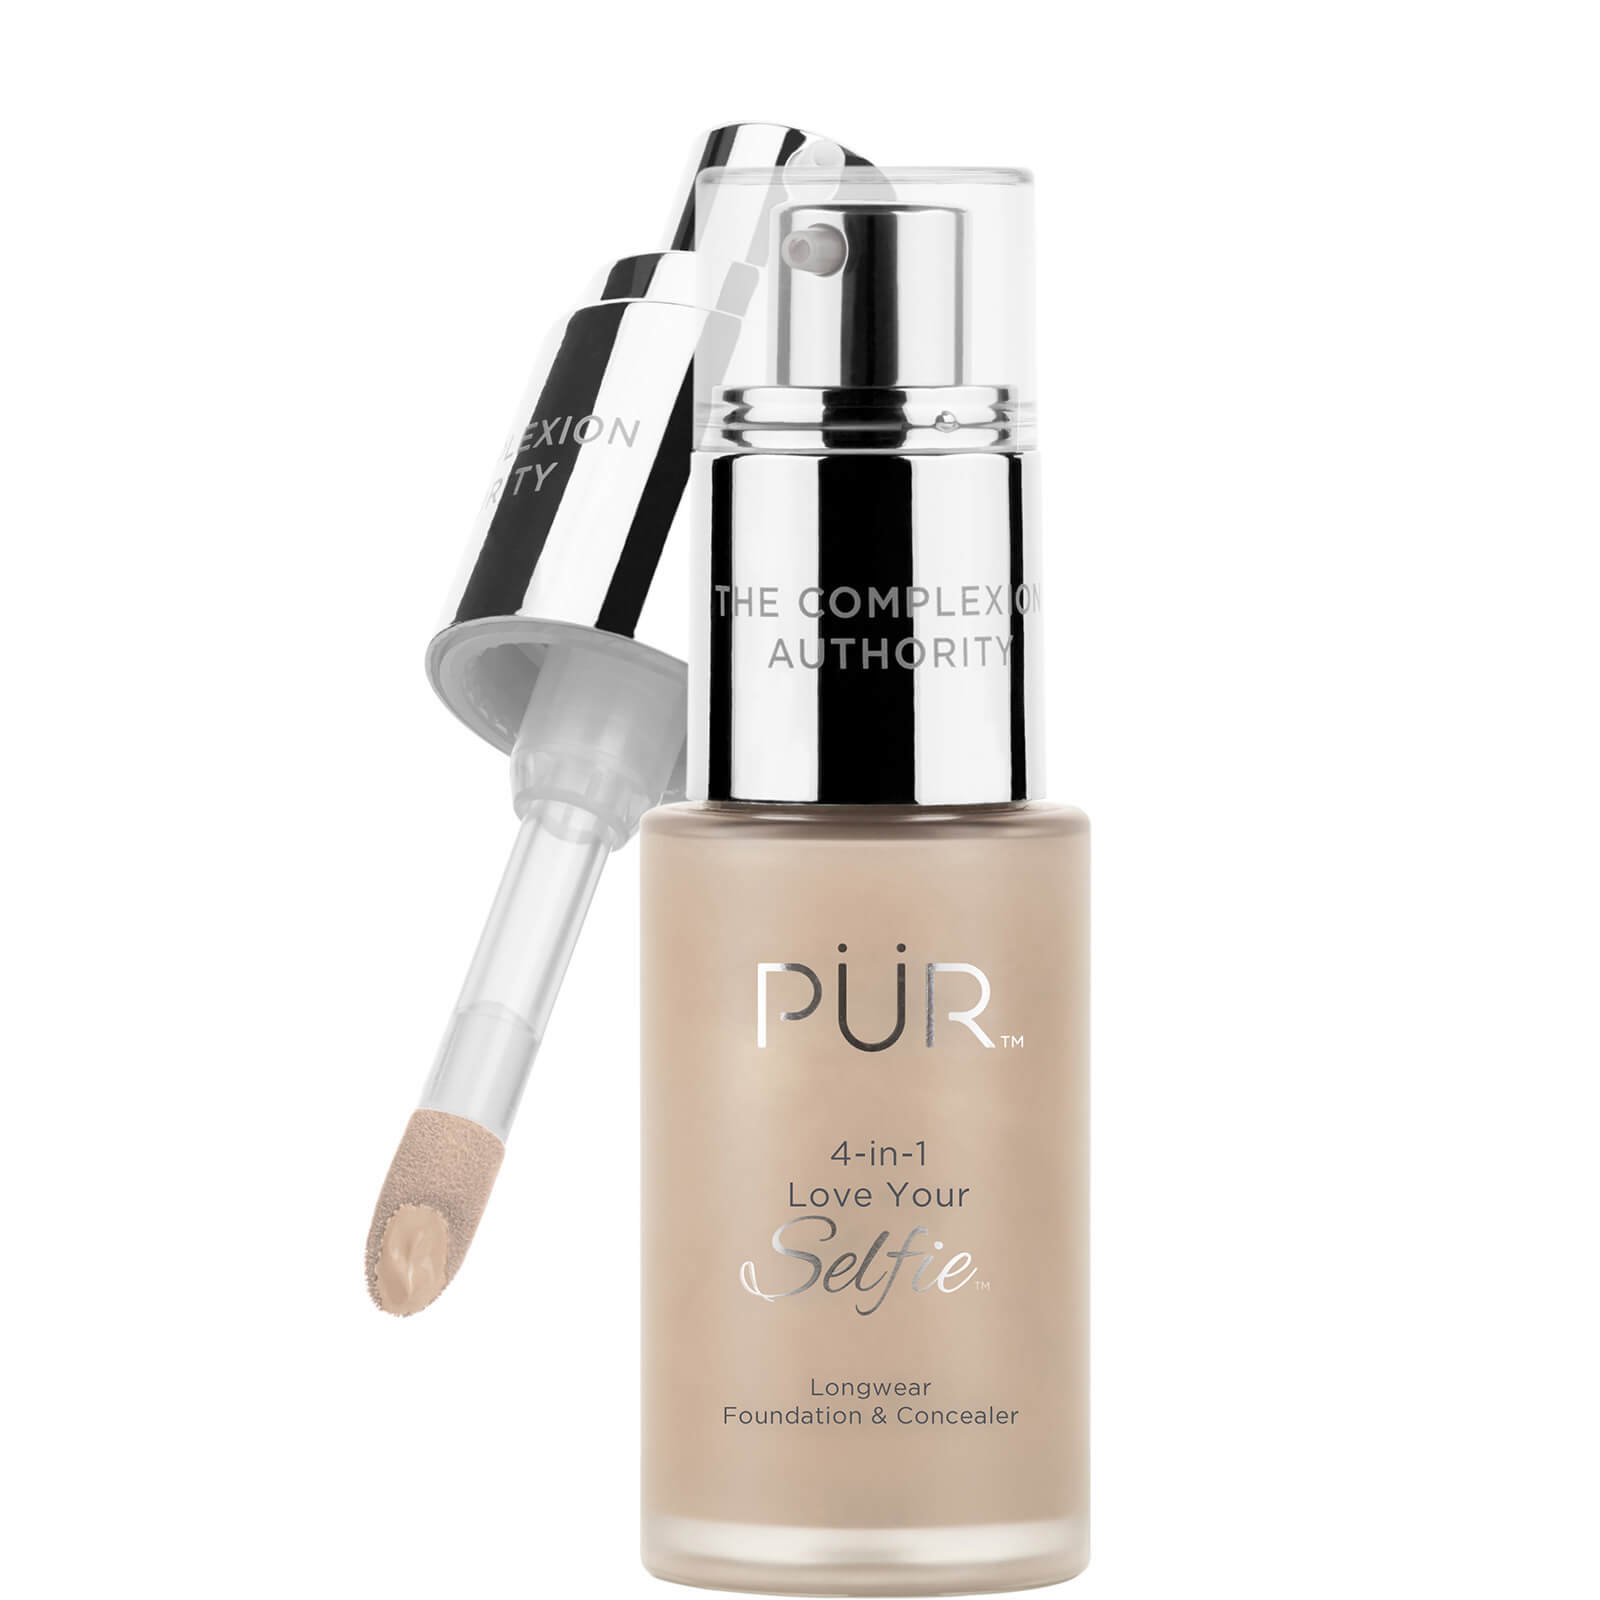 PÜR 4-in-1 Love Your Selfie Longwear Foundation and Concealer 30ml (Various Shades) - MN5/Almond